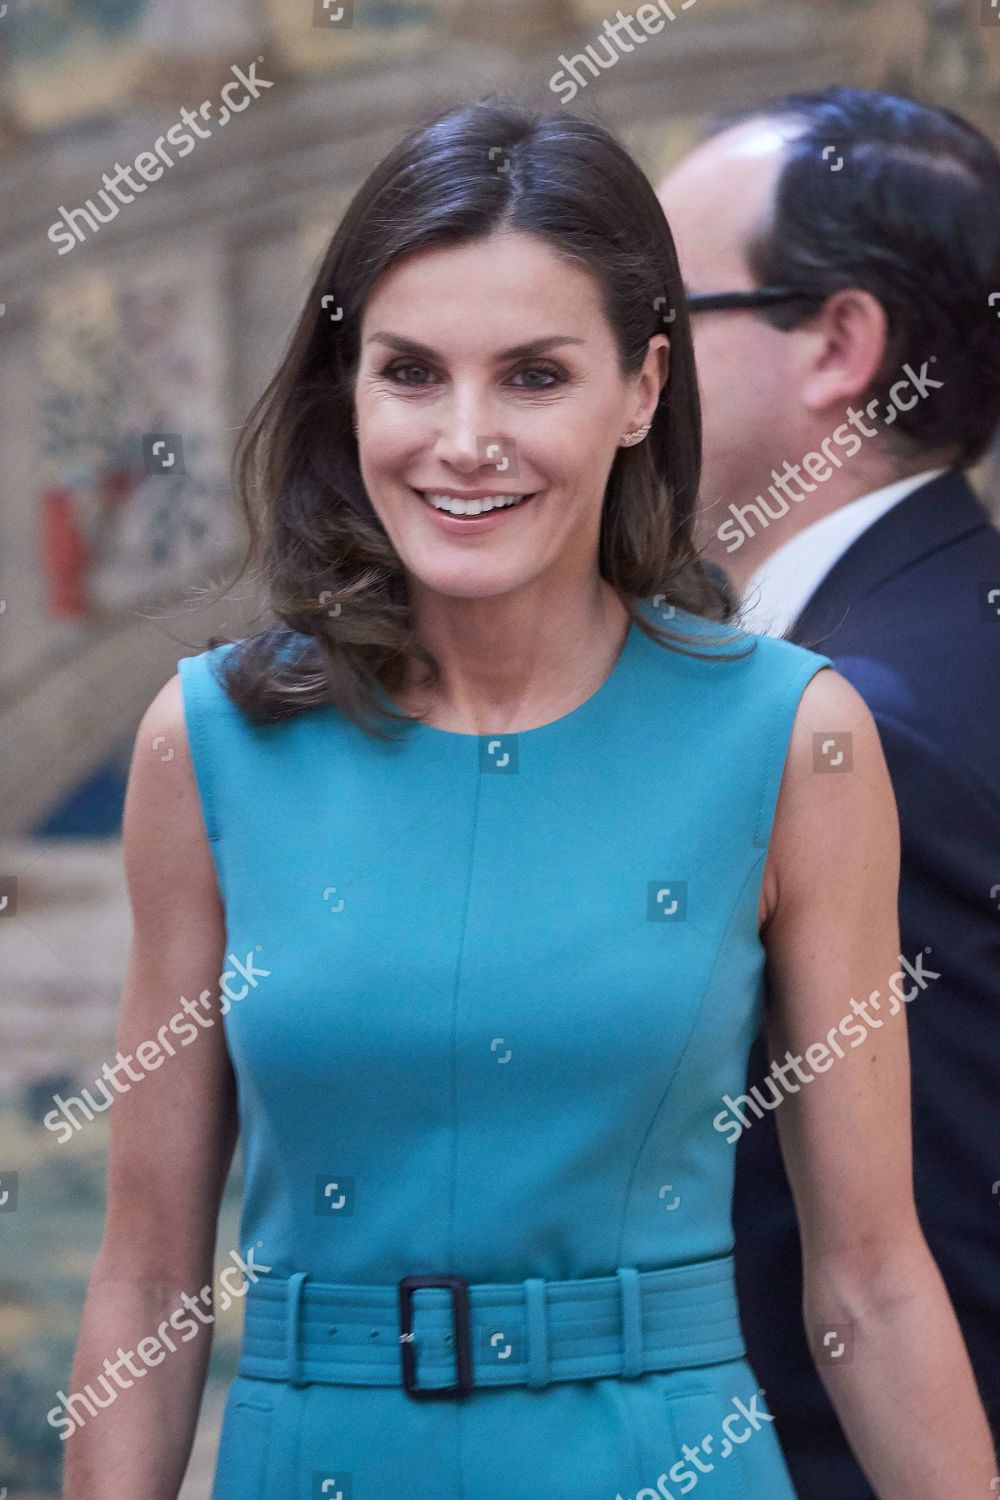 meeting-of-members-of-the-patronages-of-the-princess-of-asturias-foundation-madrid-spain-shutterstock-editorial-10321808g.jpg